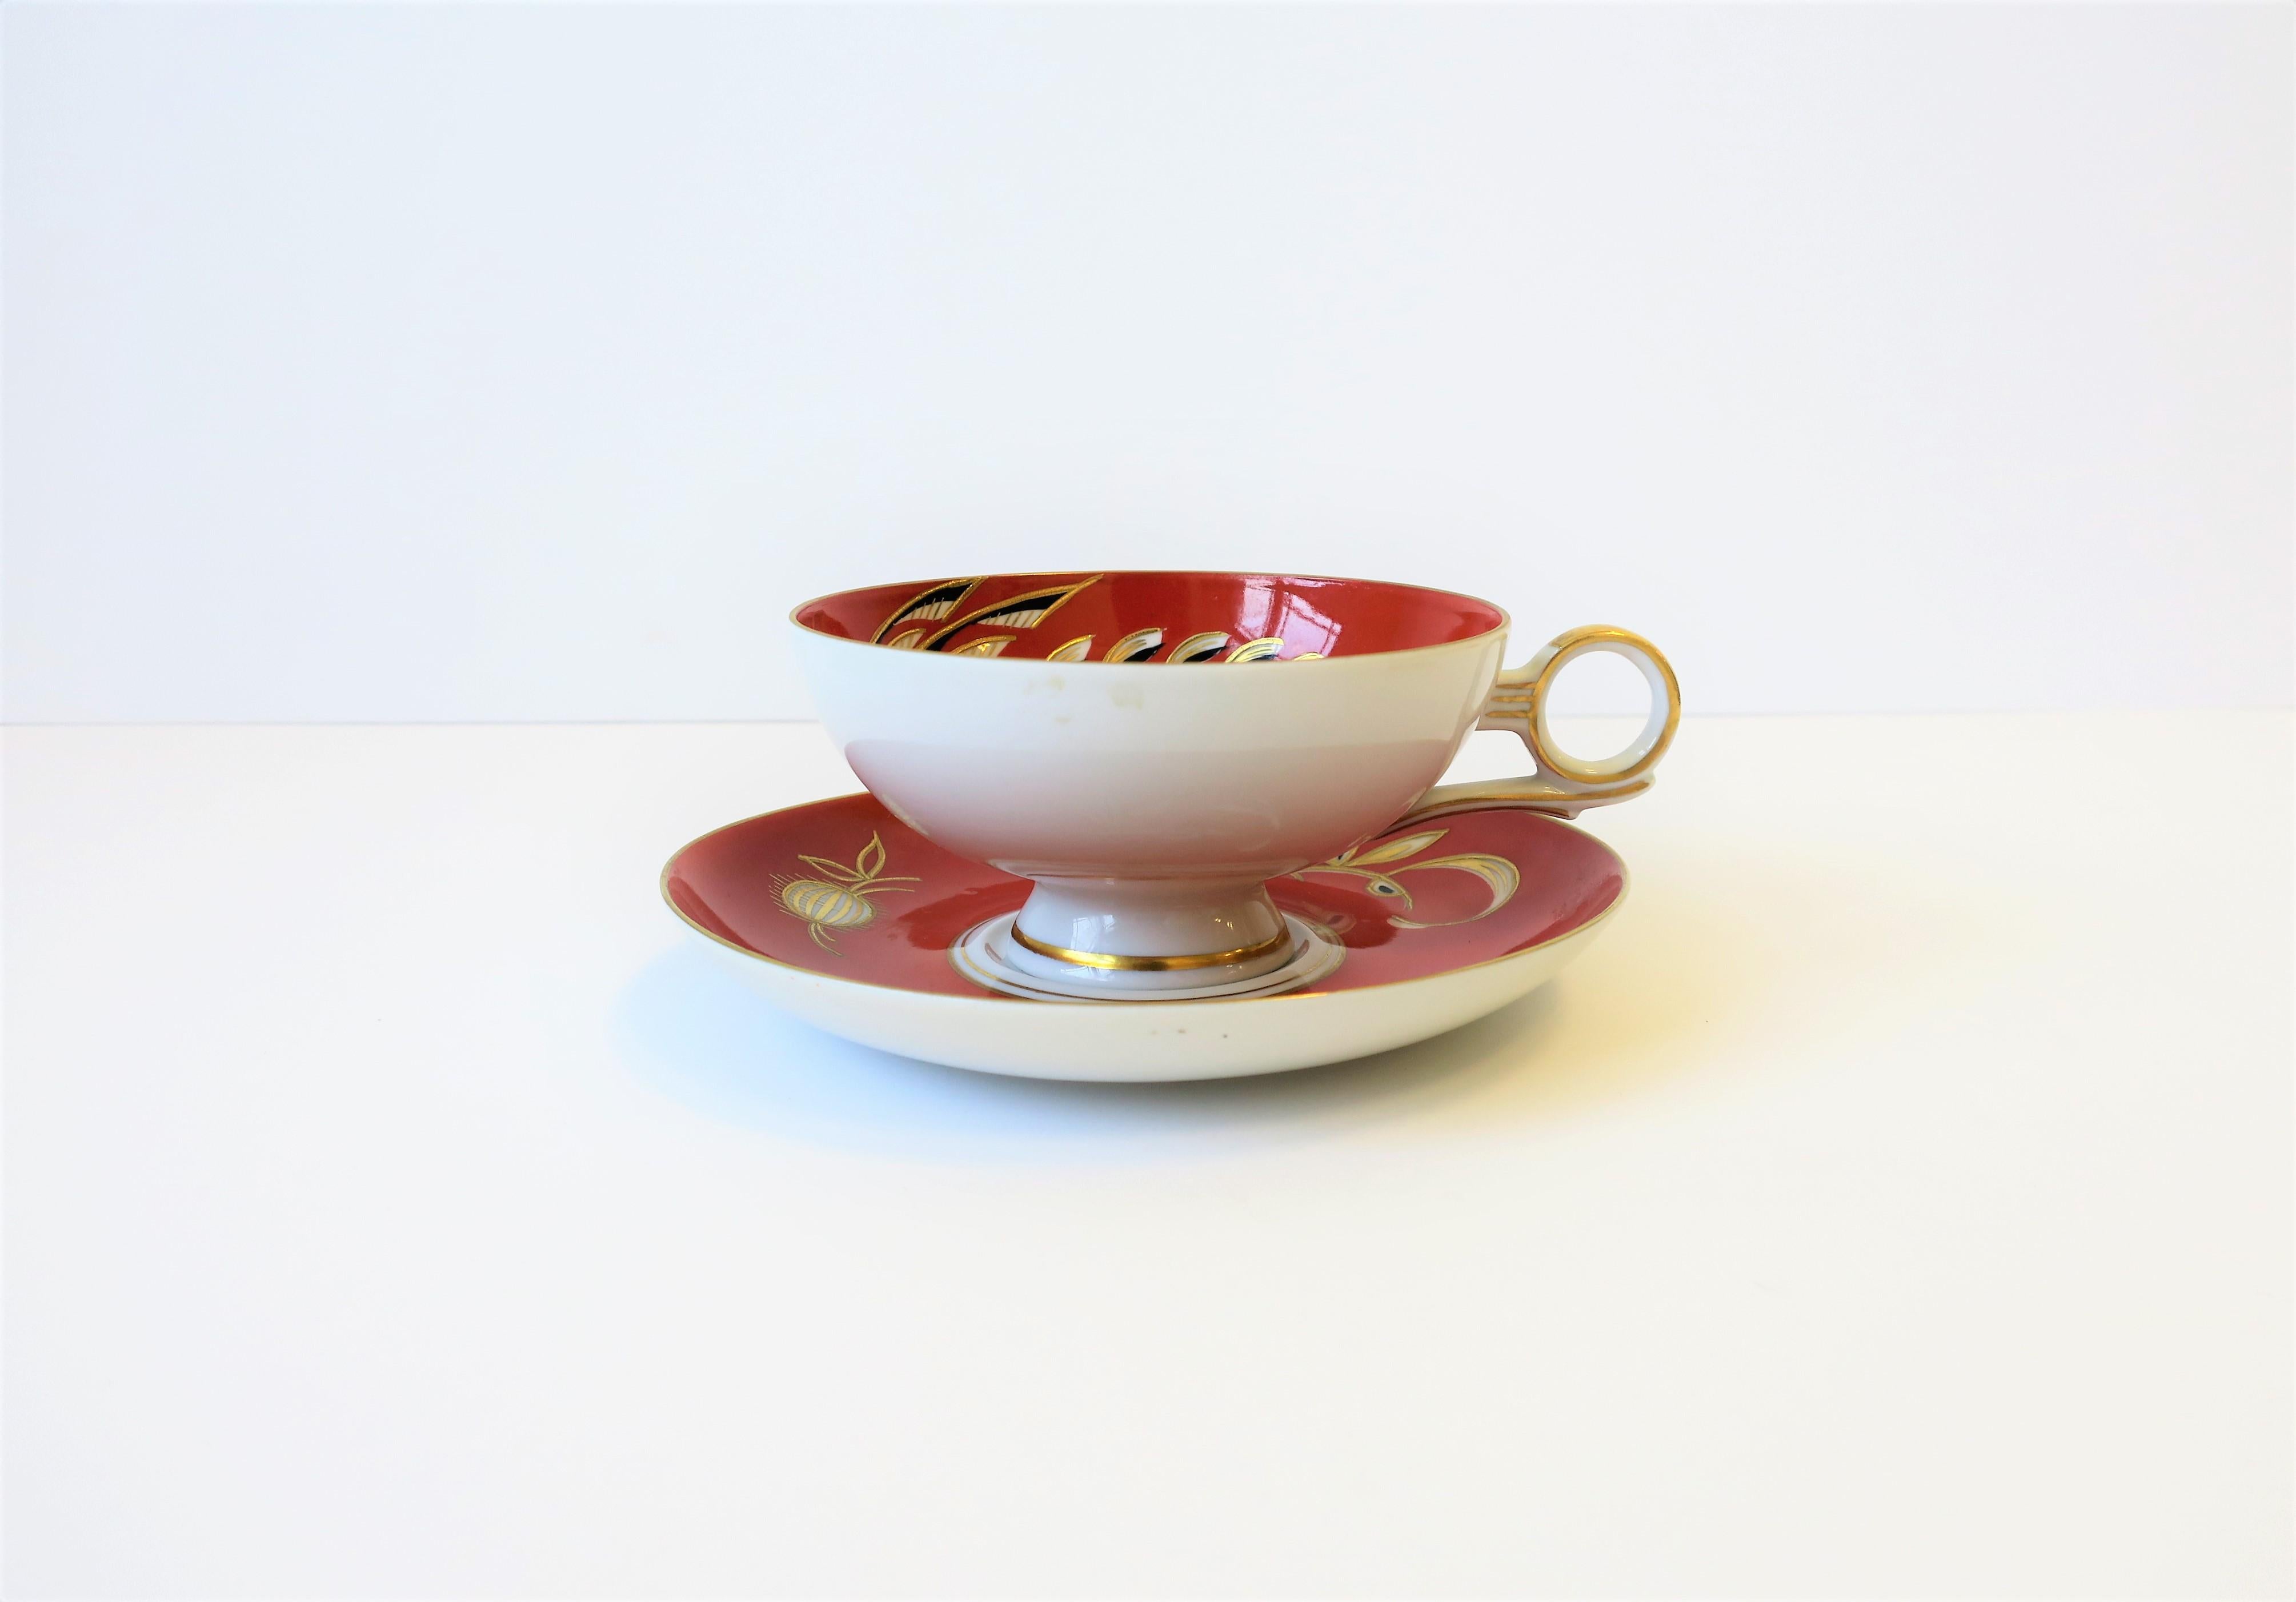 A beautiful porcelain Art Deco coffee or tea cup and saucer, Germany, circa 1960s. Design and colors include: white, terracotta, black and gold - with an elaborate bird design in a raised gold relief that's hand applied. With marker's mark on bottom